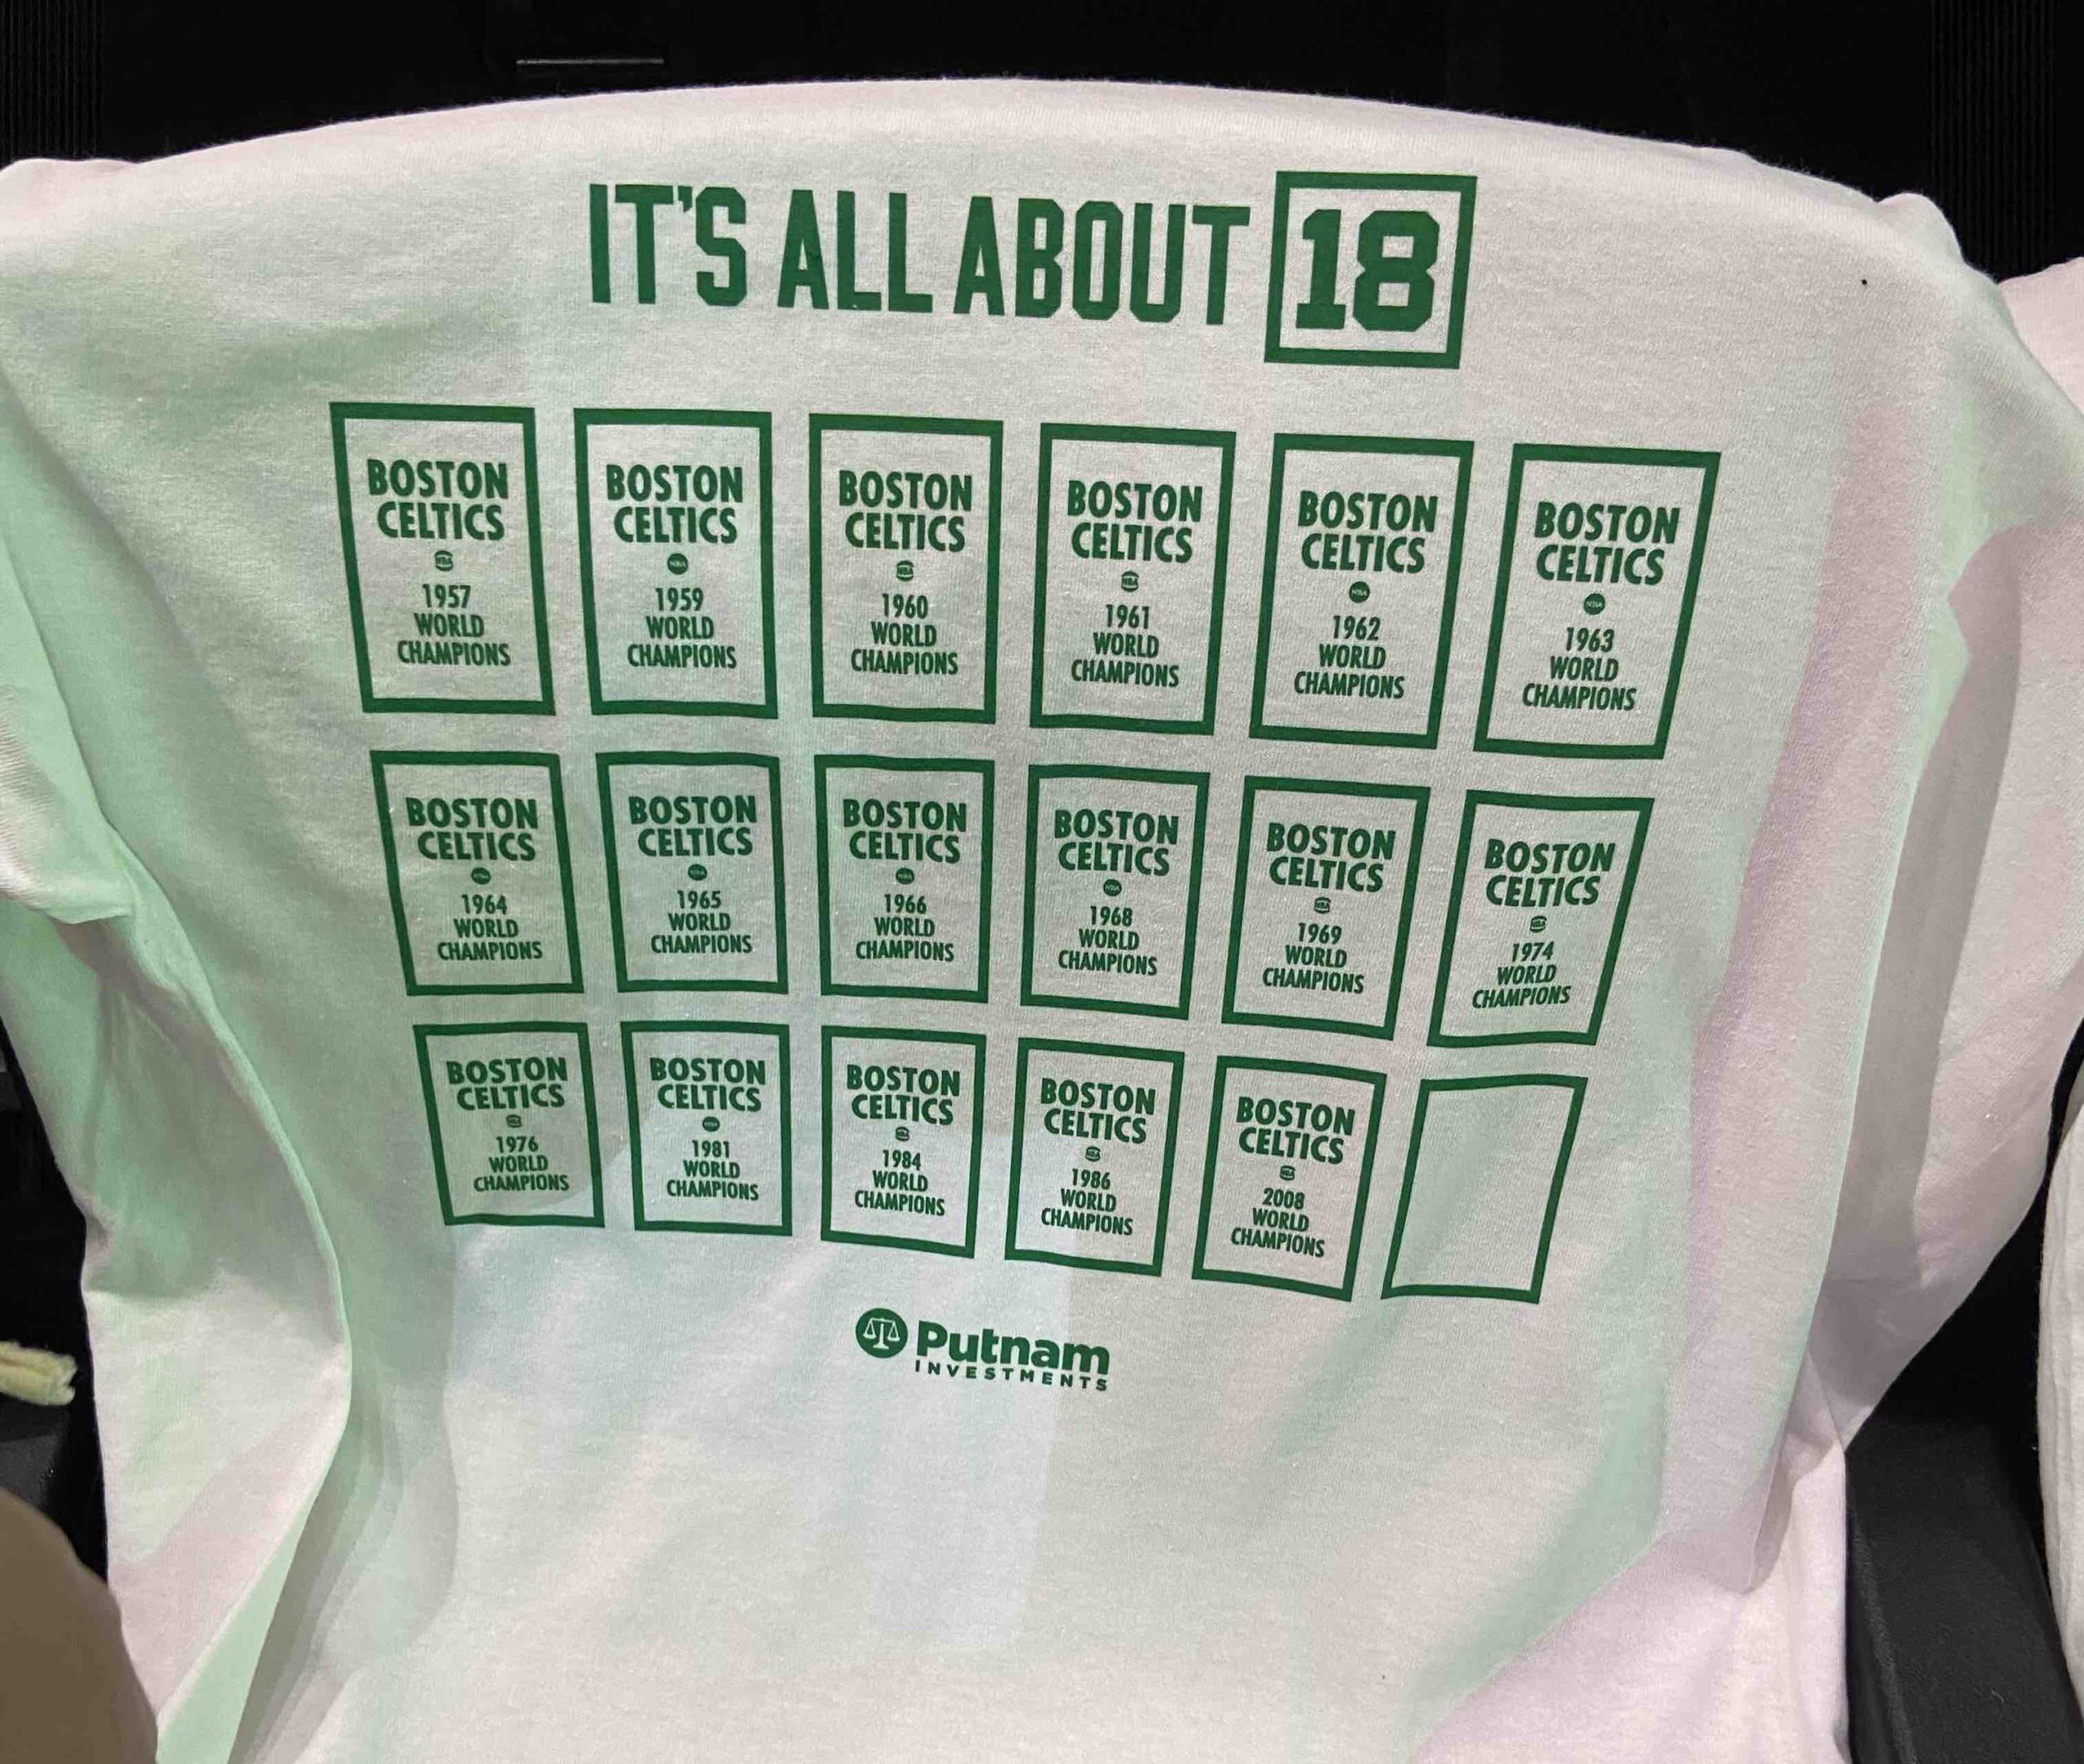 Free t-shirt that came free at TD Garden for the NBA Finals between the Celtics and the Warriors. 